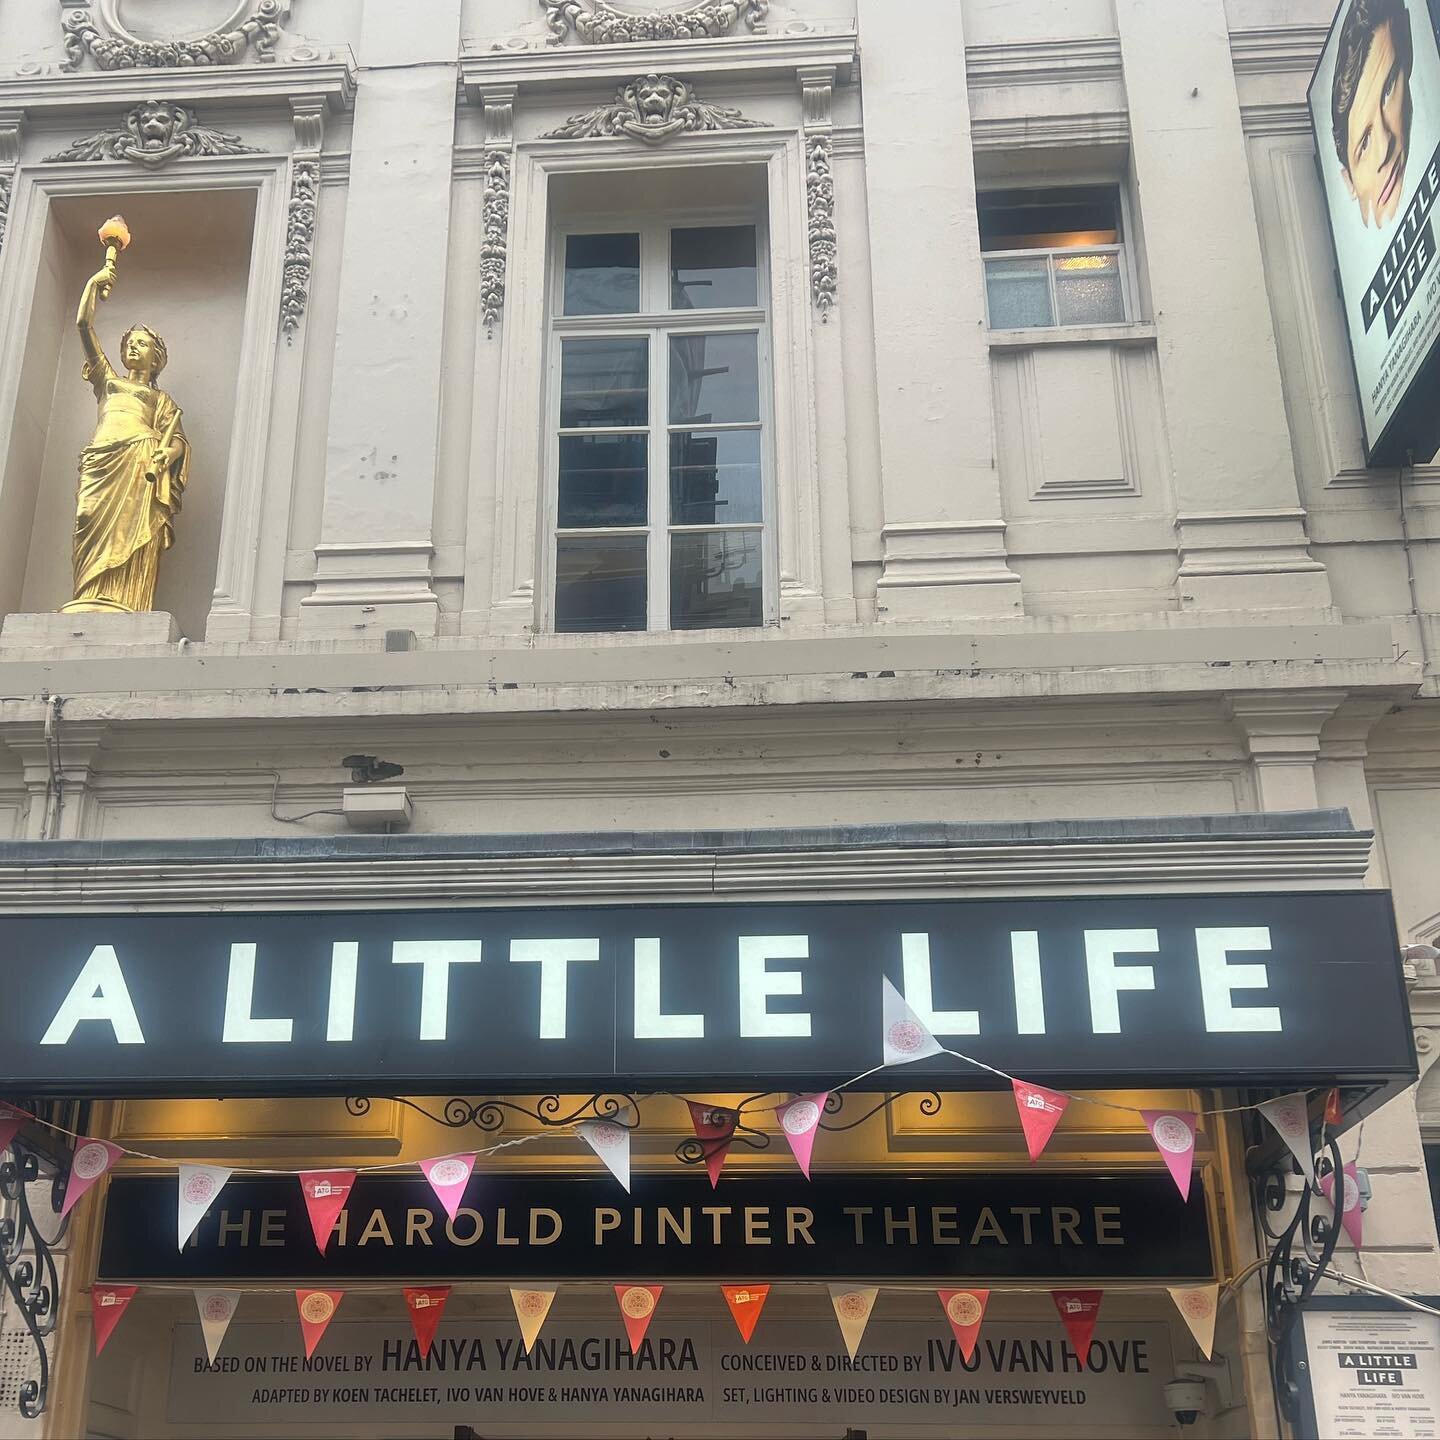 Wow, this will stay with me for a very long time. Massive congratulations to the whole cast; hauntingly visceral, beautiful &amp; unforgettable @alittlelifeplay @hanyayanagihara &hearts;️

#alittlelifeplay